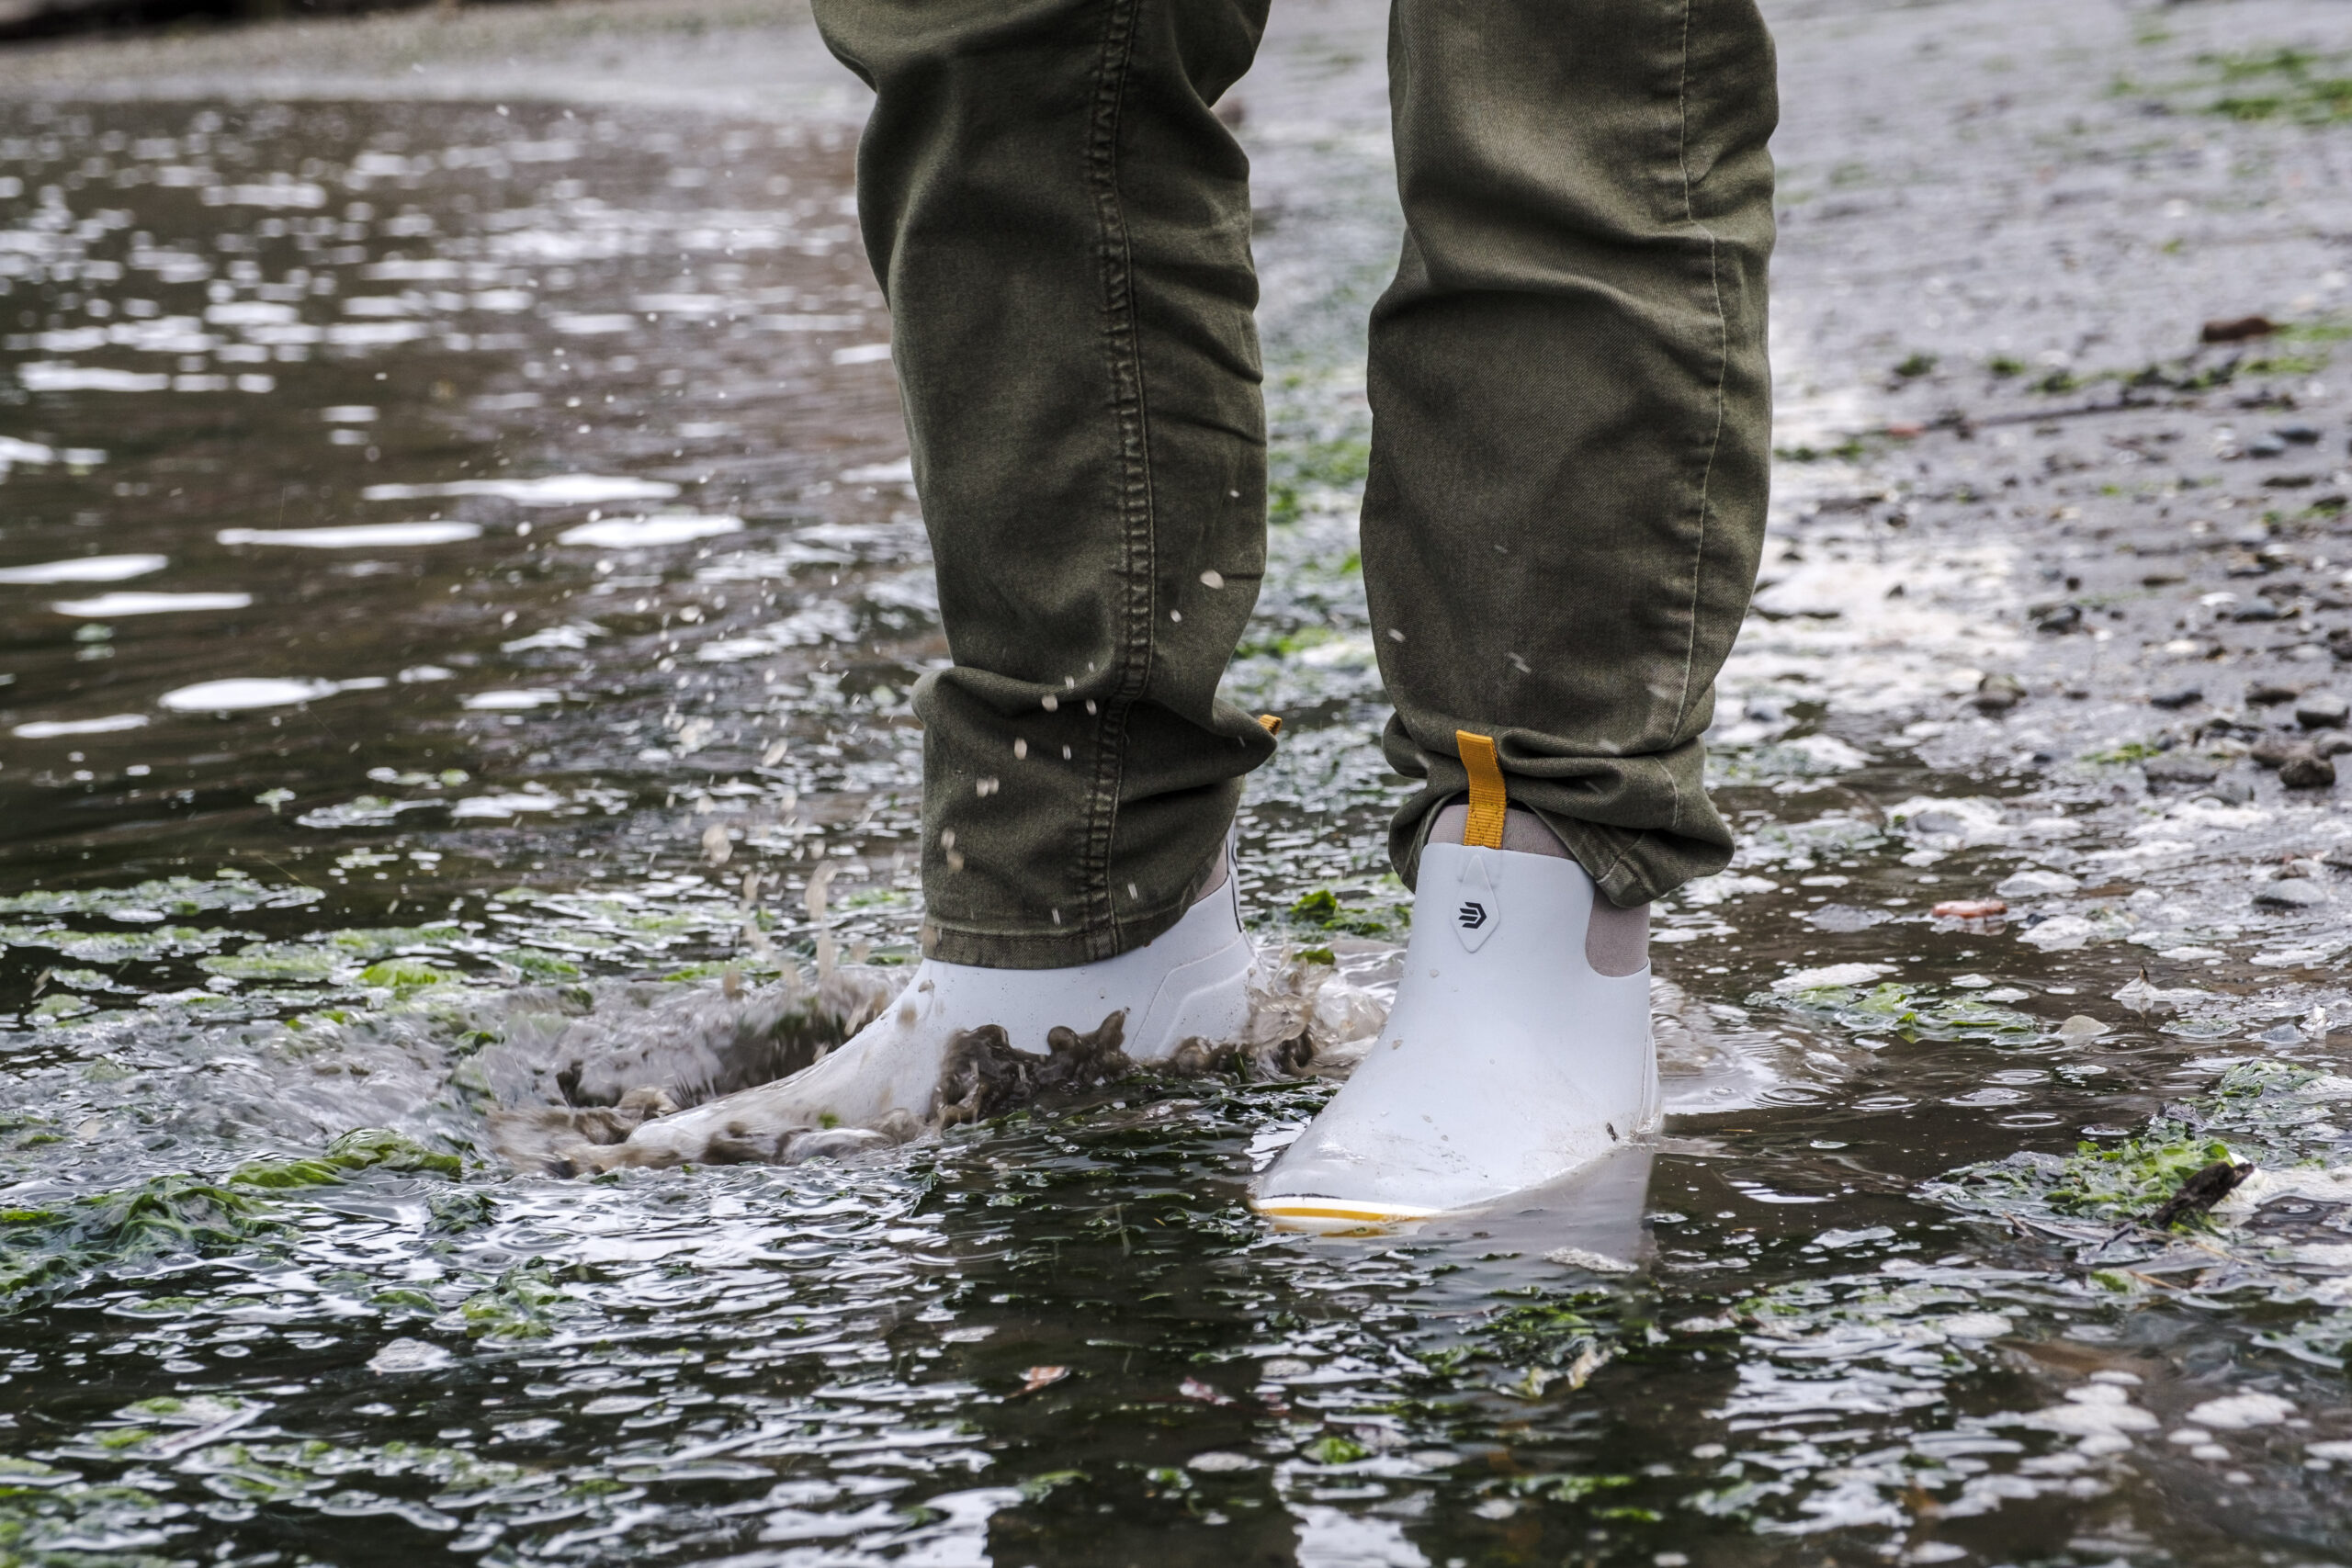 A Wet and Salty Review of the Patagonia Foot Tractor Wading Boots